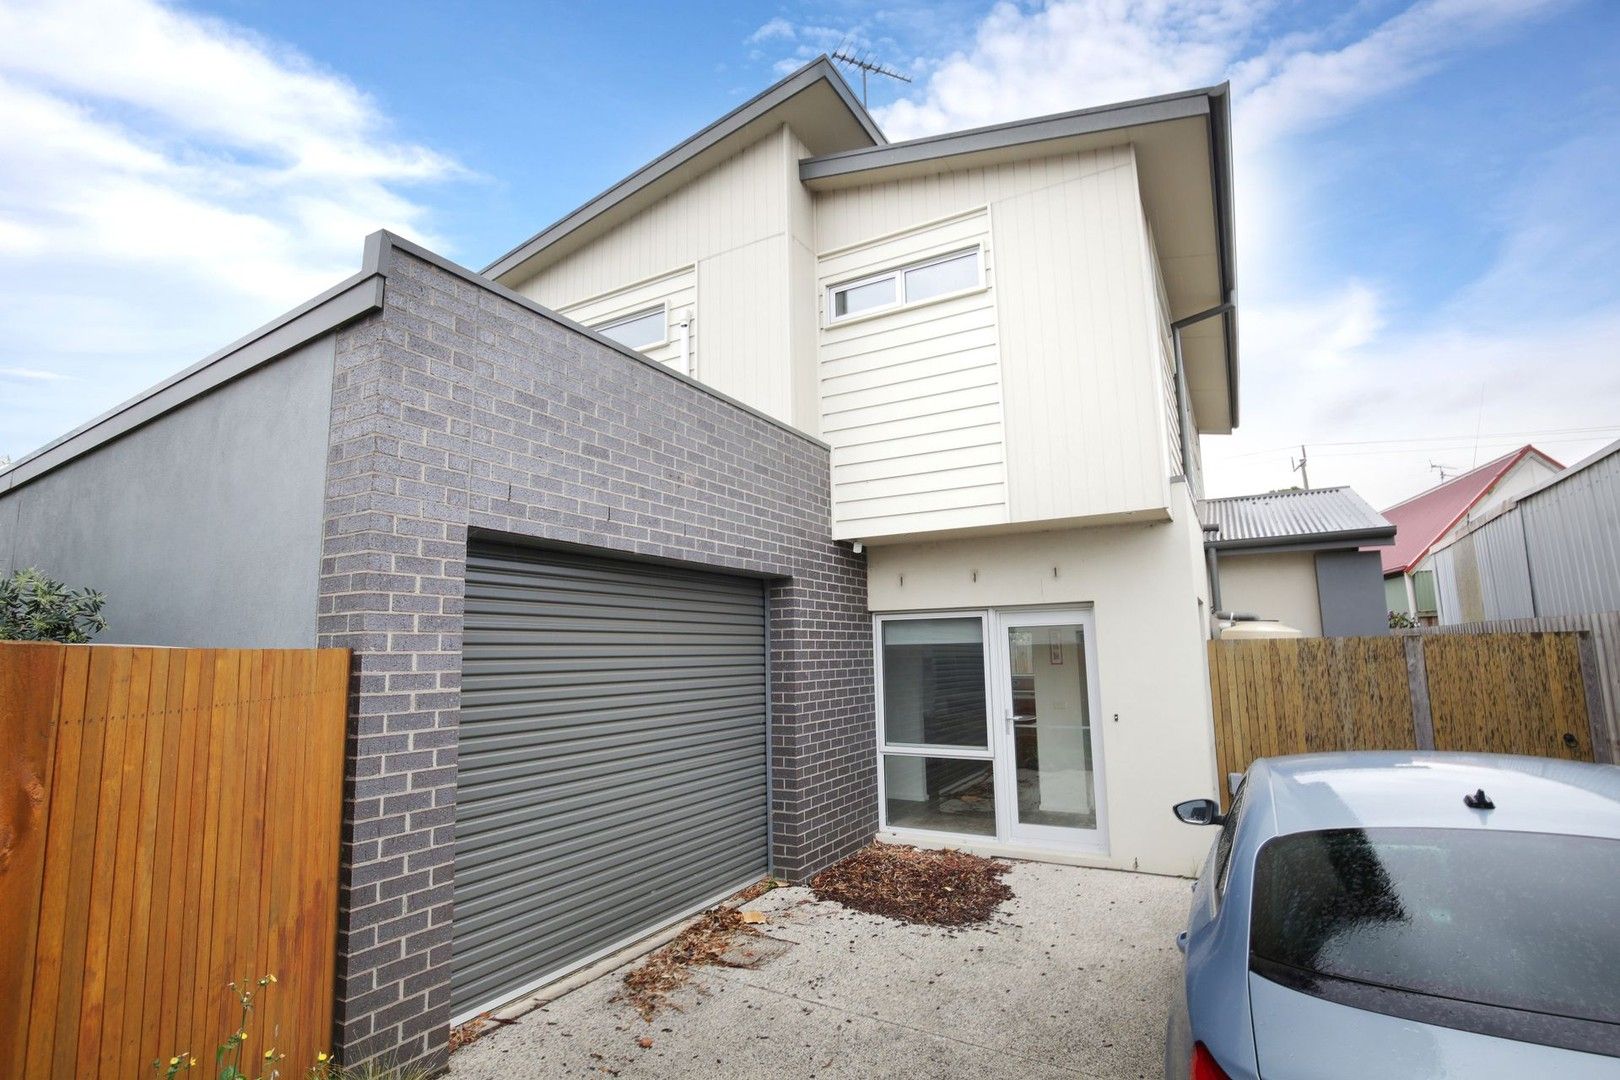 3 bedrooms House in 2/27 Richmond Cres GEELONG VIC, 3220